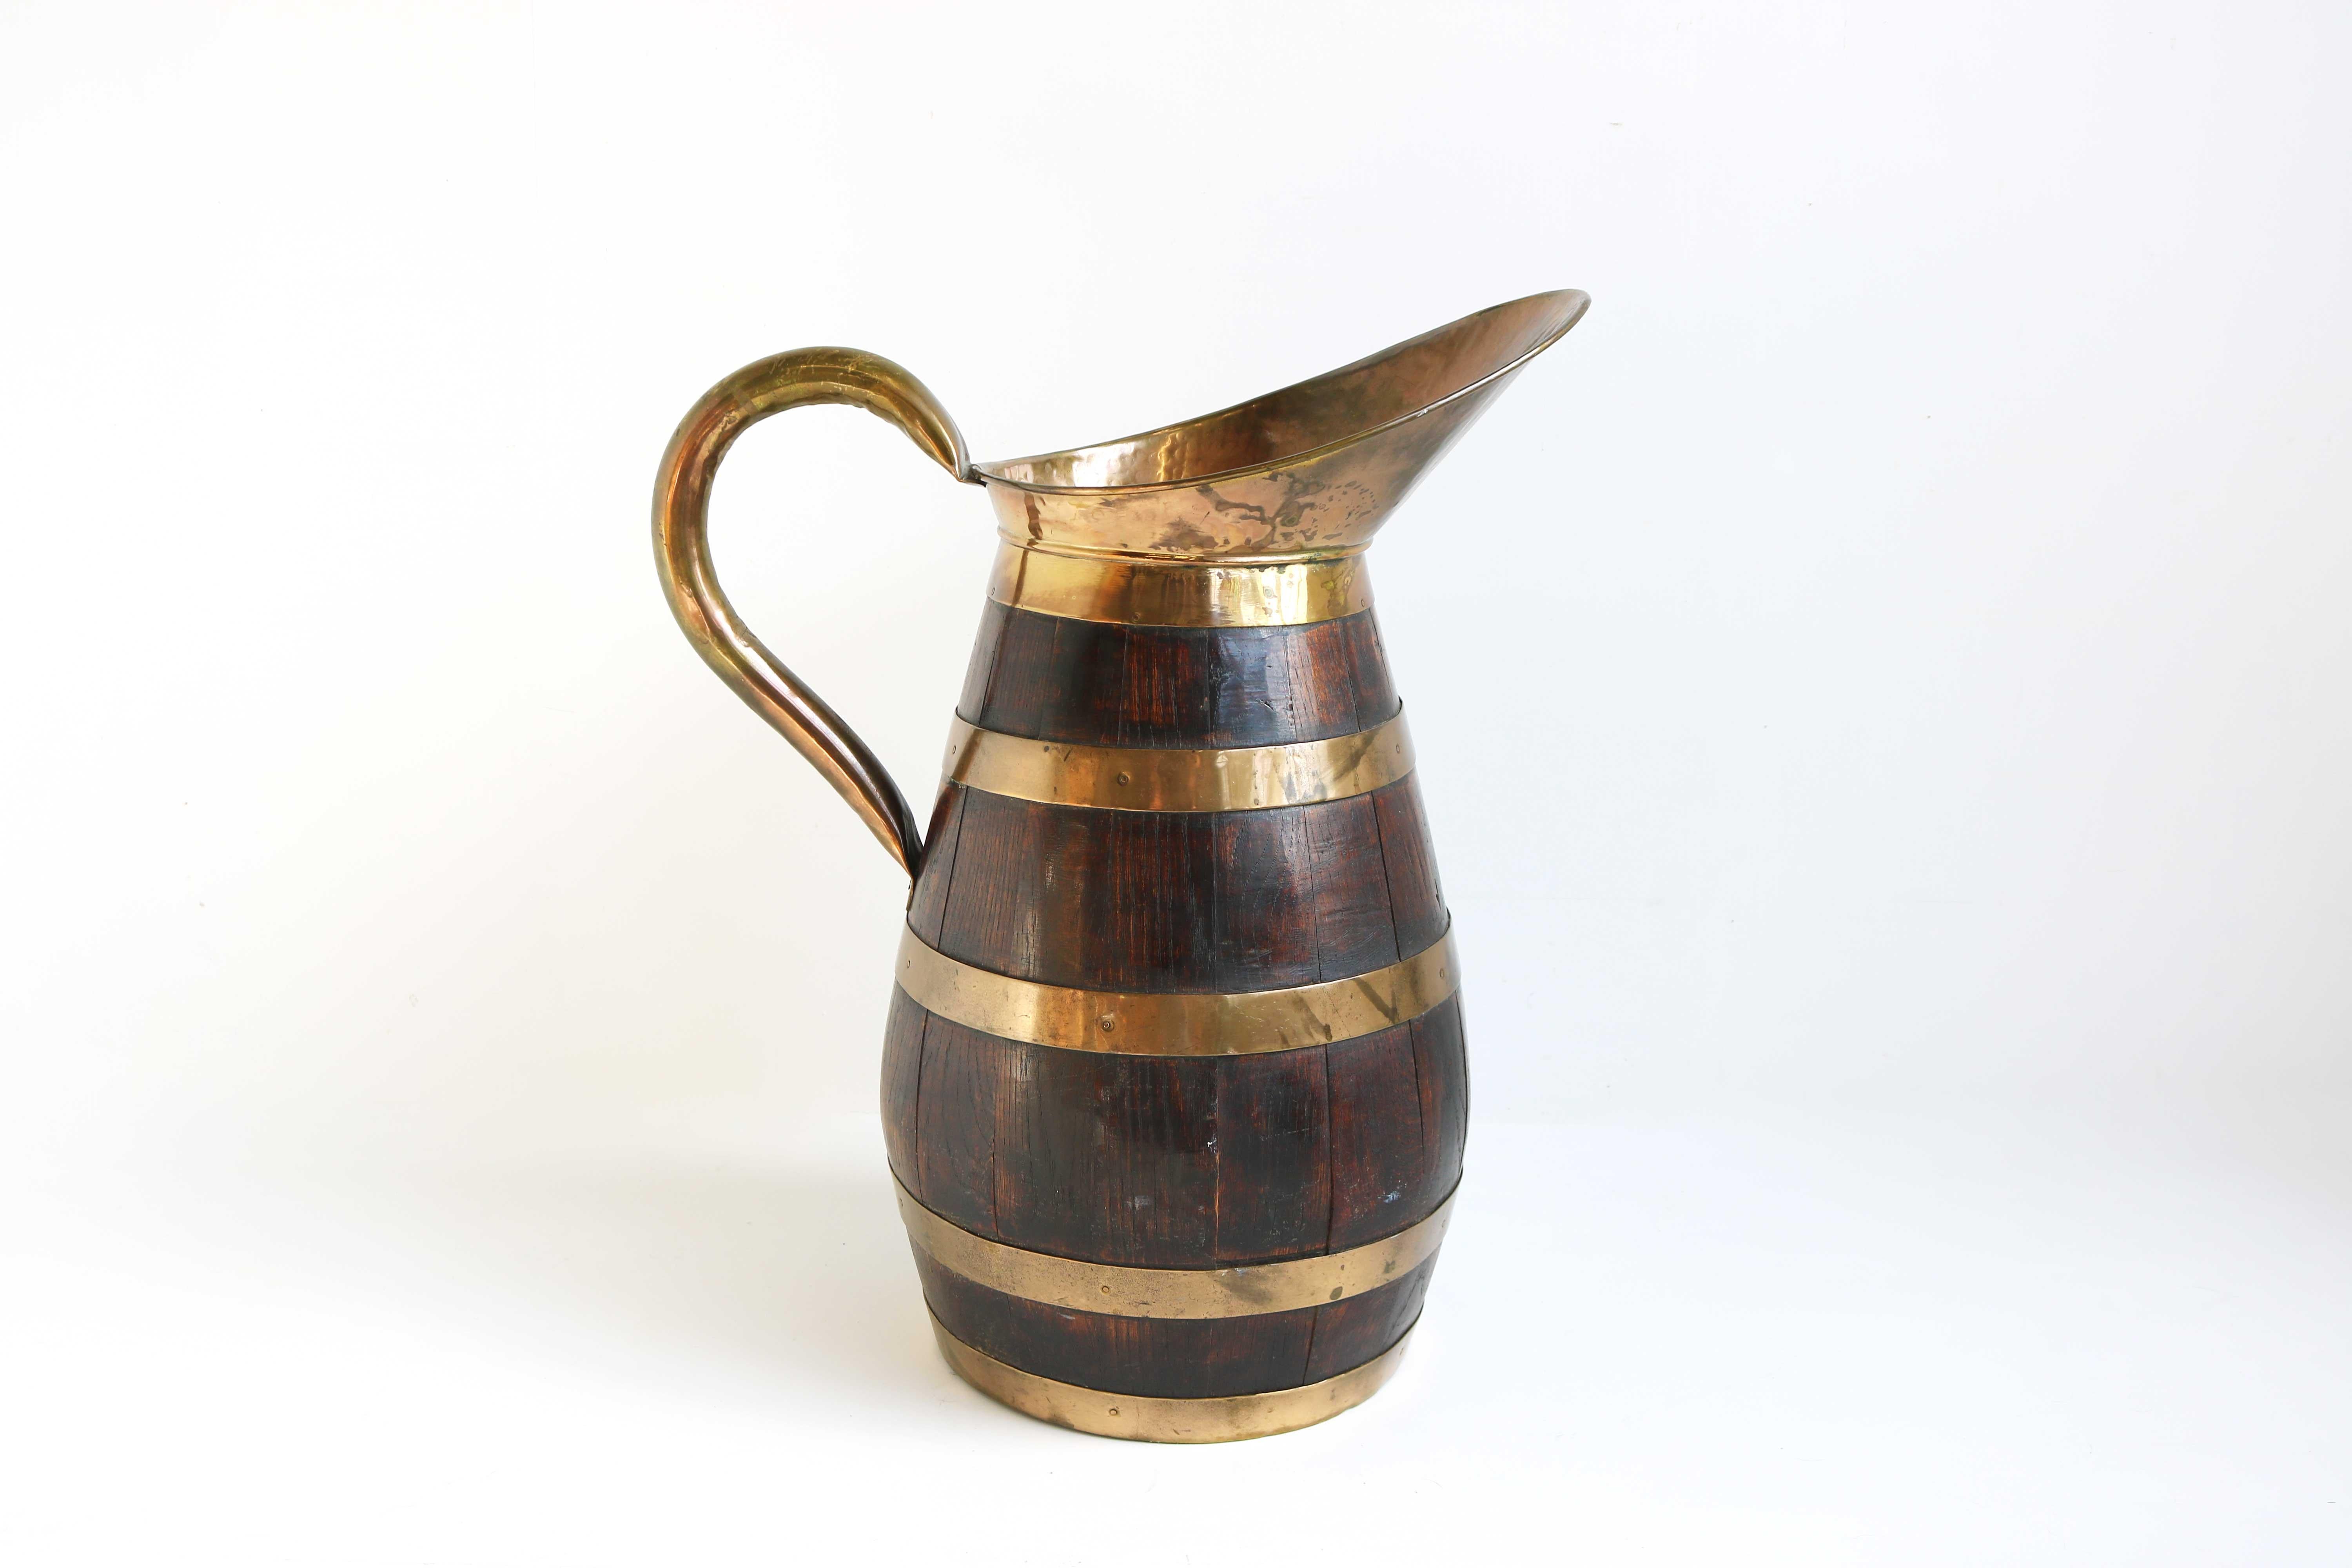 A large 19th century rustic French oak and brass banded handmade cider pitcher , from Normandy
Accessorize your wine cellar , kitchen , dining room or entryway with this antique Water or Wine Jug.
This impressive old pitcher is made of barrel oak